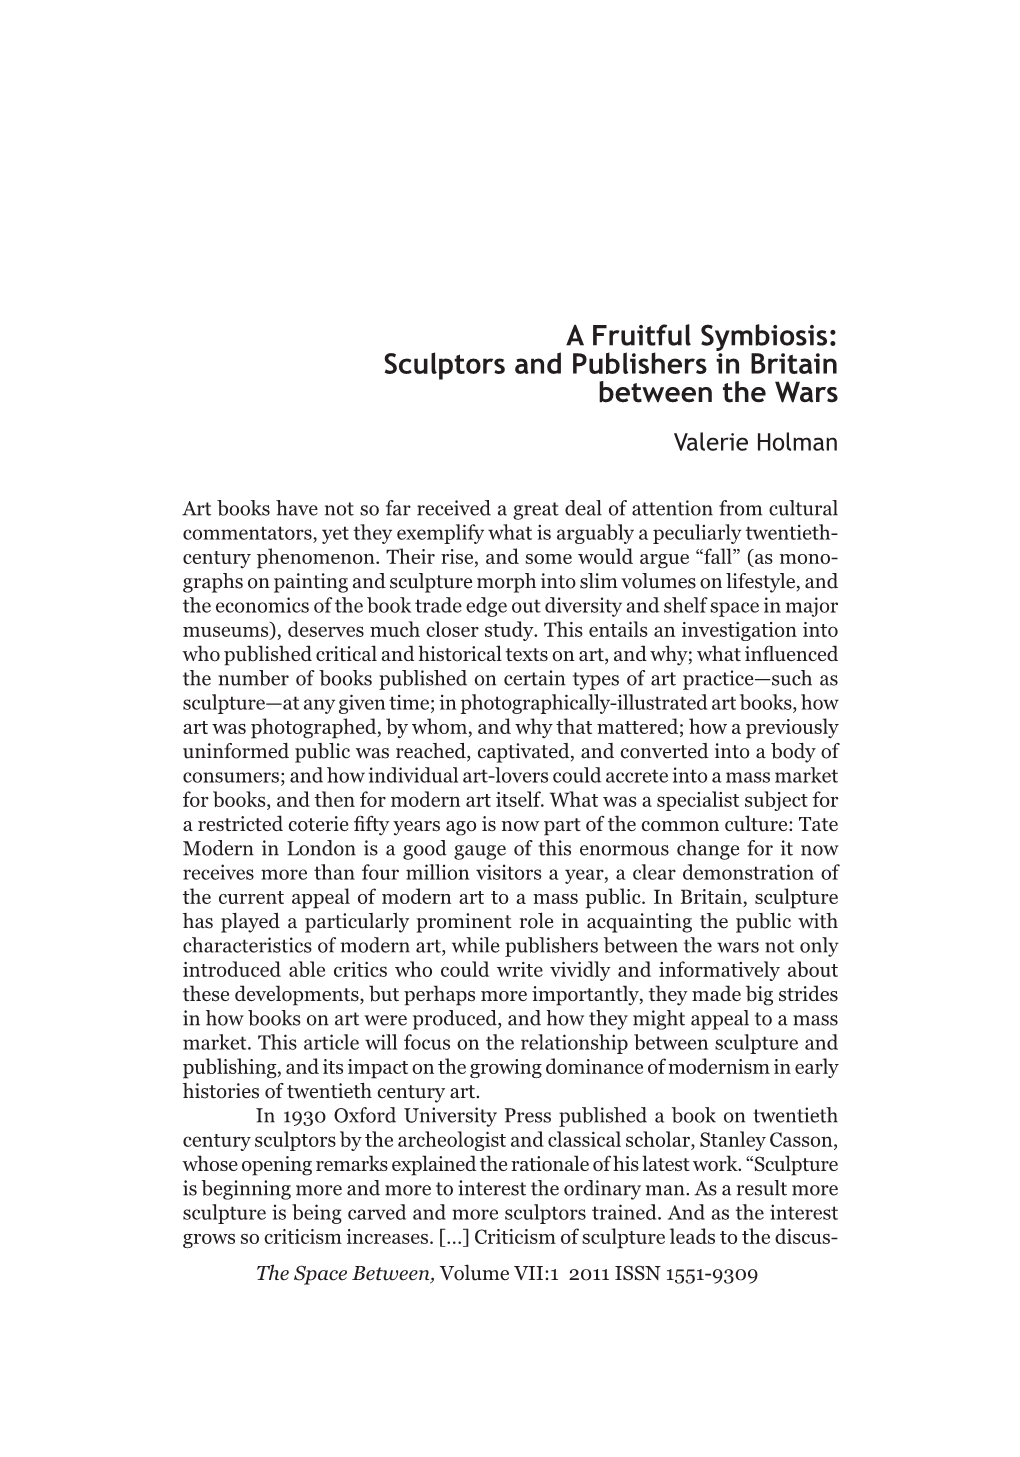 A Fruitful Symbiosis: Sculptors and Publishers in Britain Between the Wars Valerie Holman